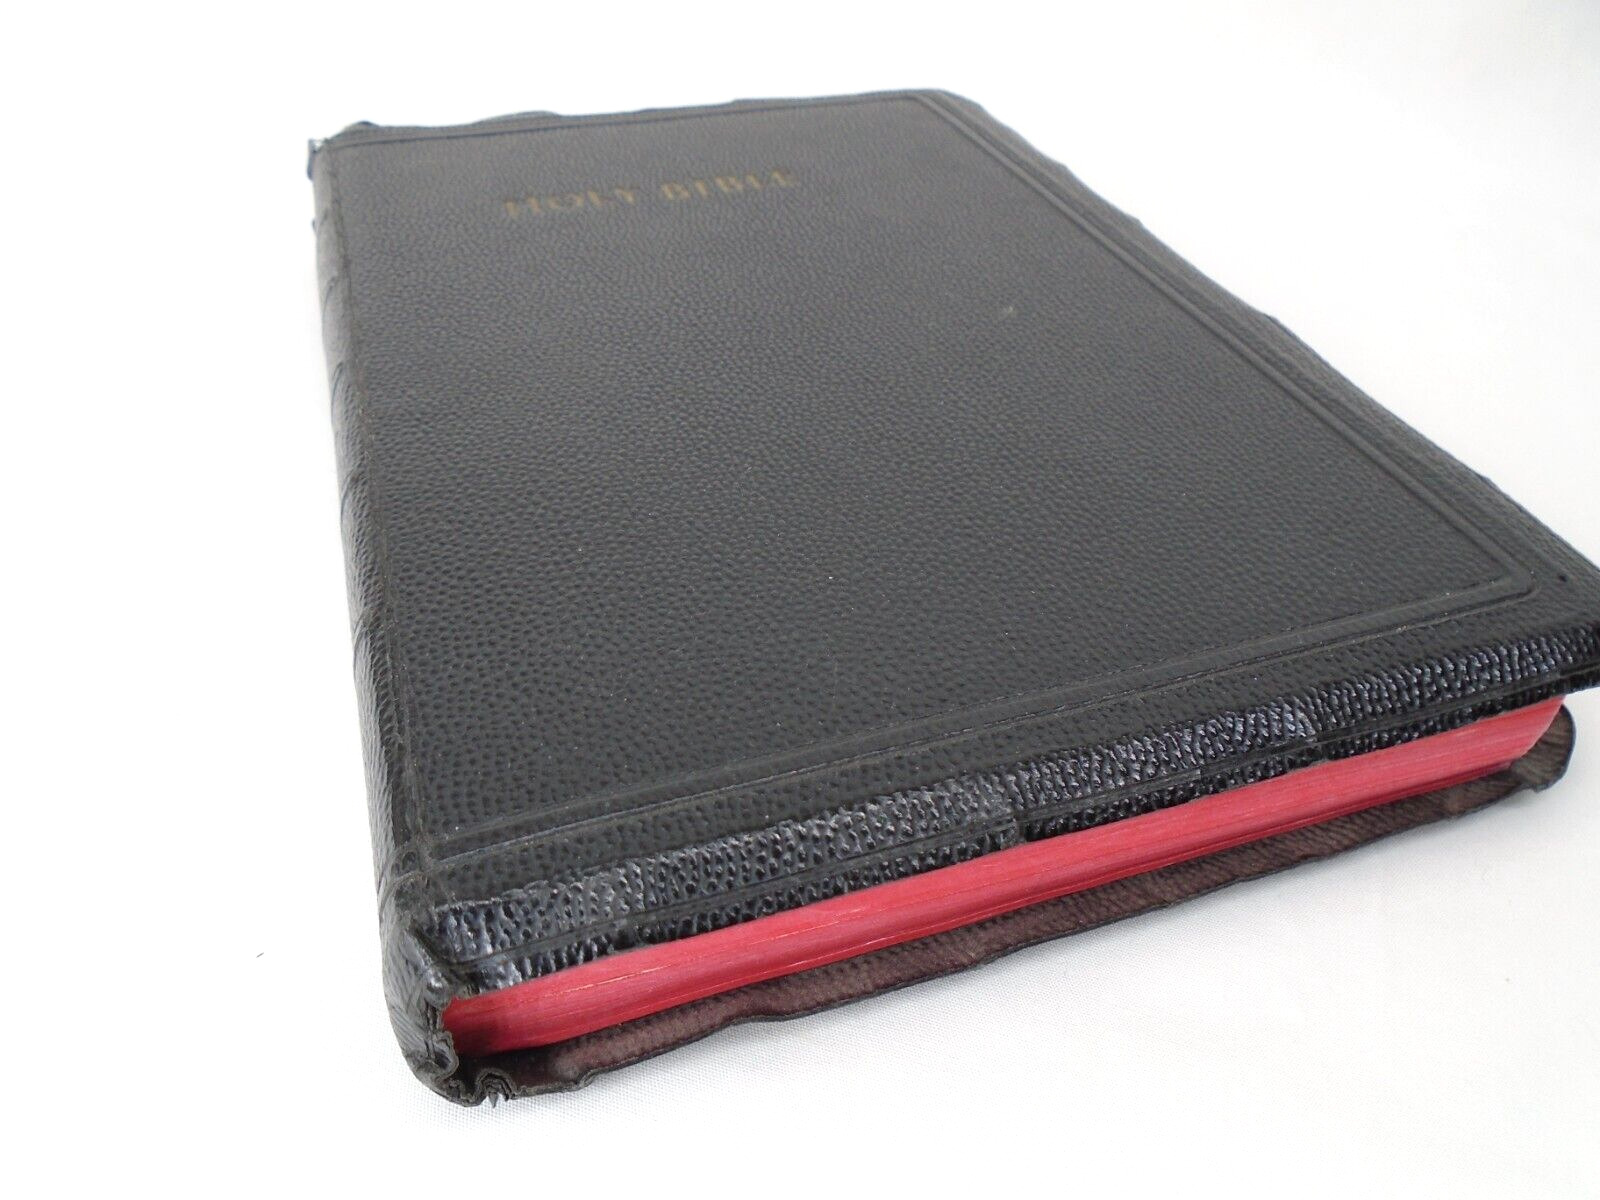 Vintage VTG Bible Old & New Testament The word of Christ In red Letters